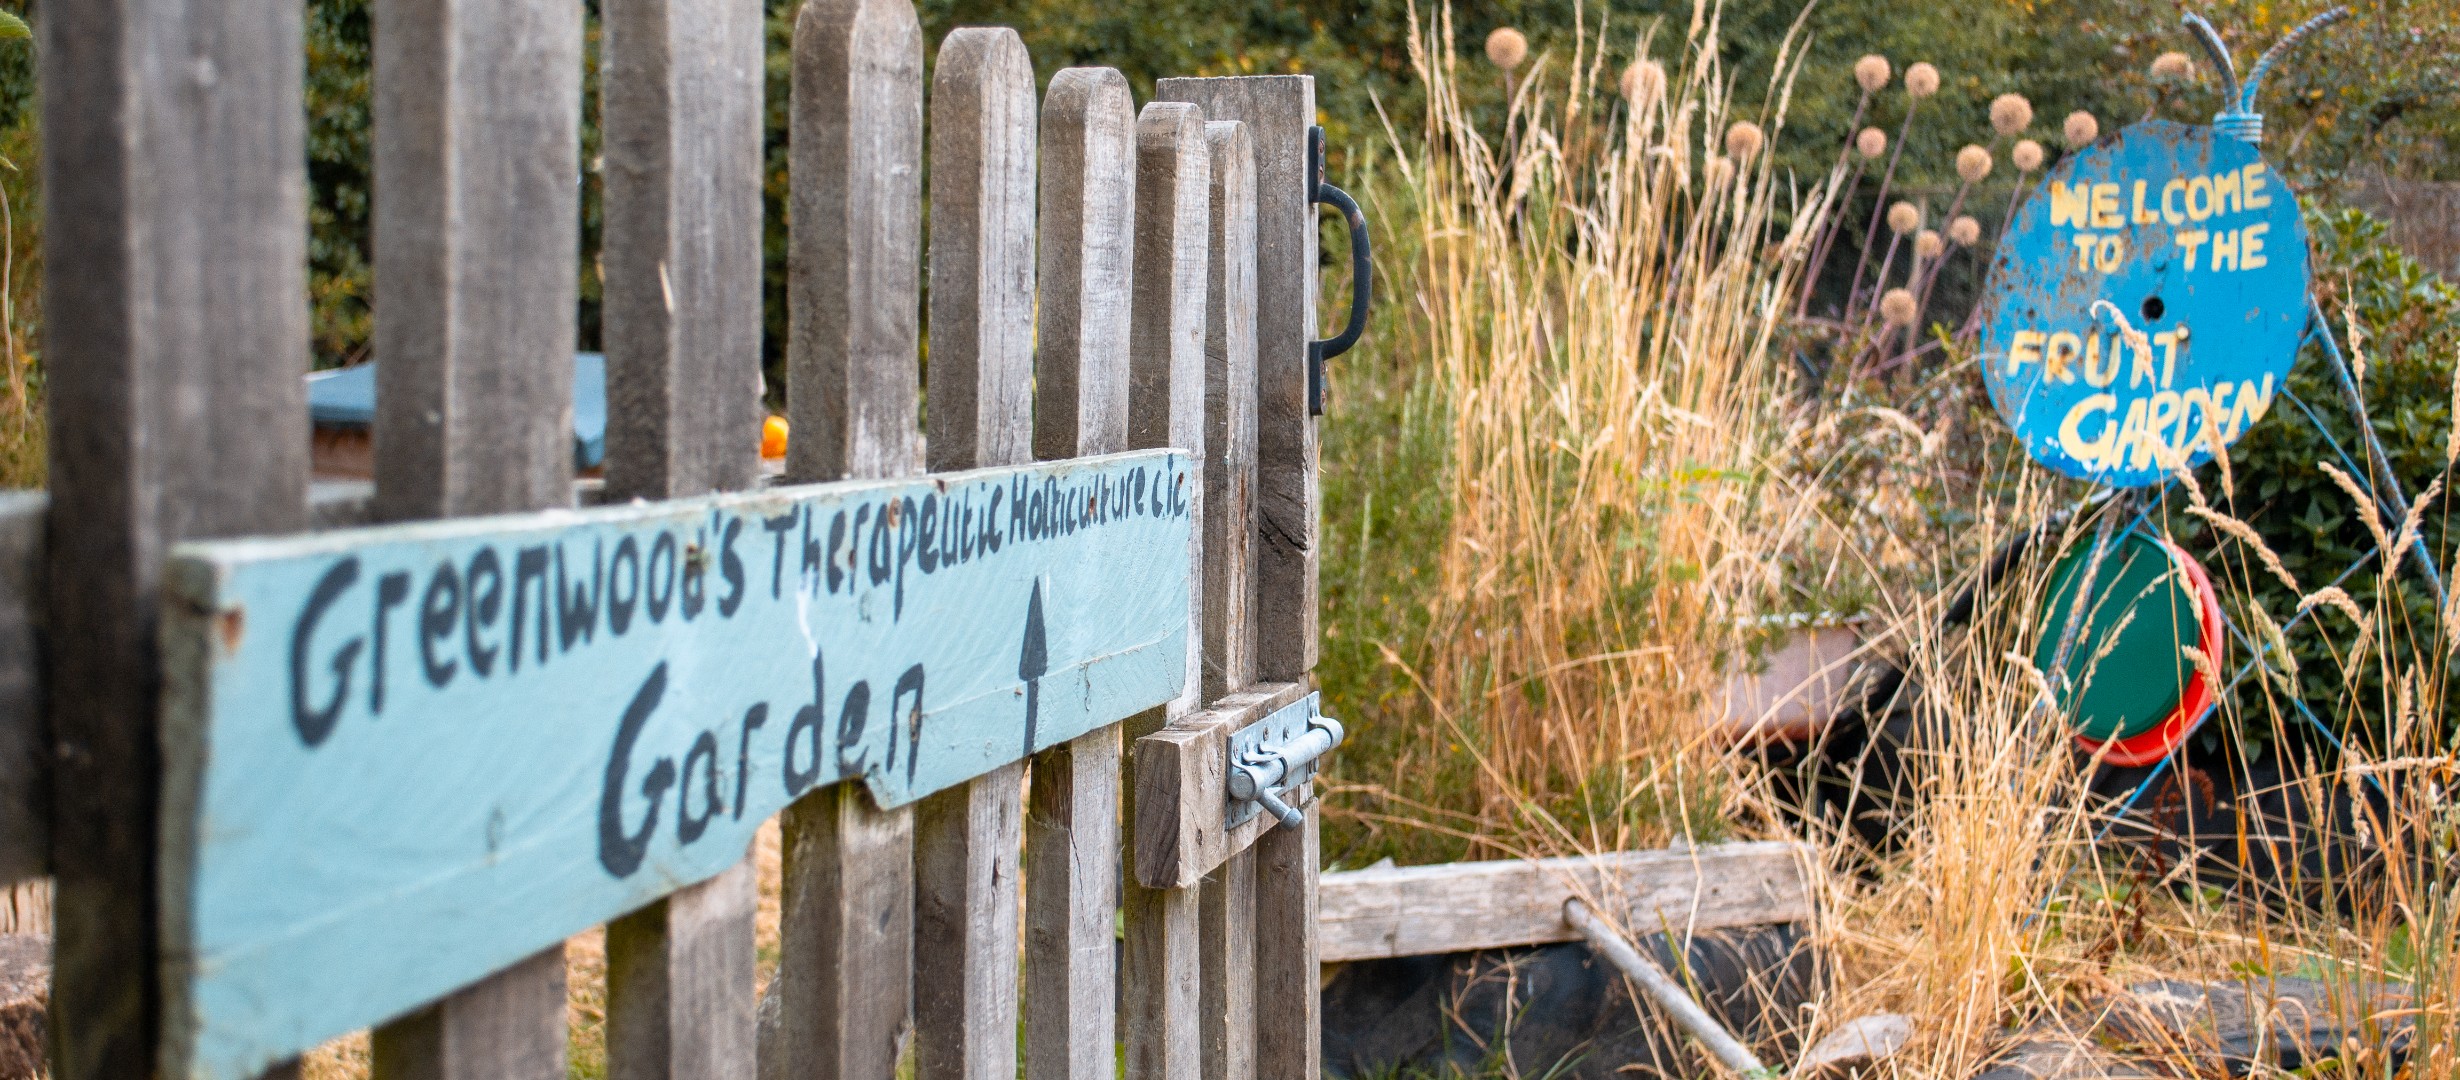 Image of a gate with a hand painted sign saying Greenwoods Therapeutic Horticulture CIC Garden with an arrow.